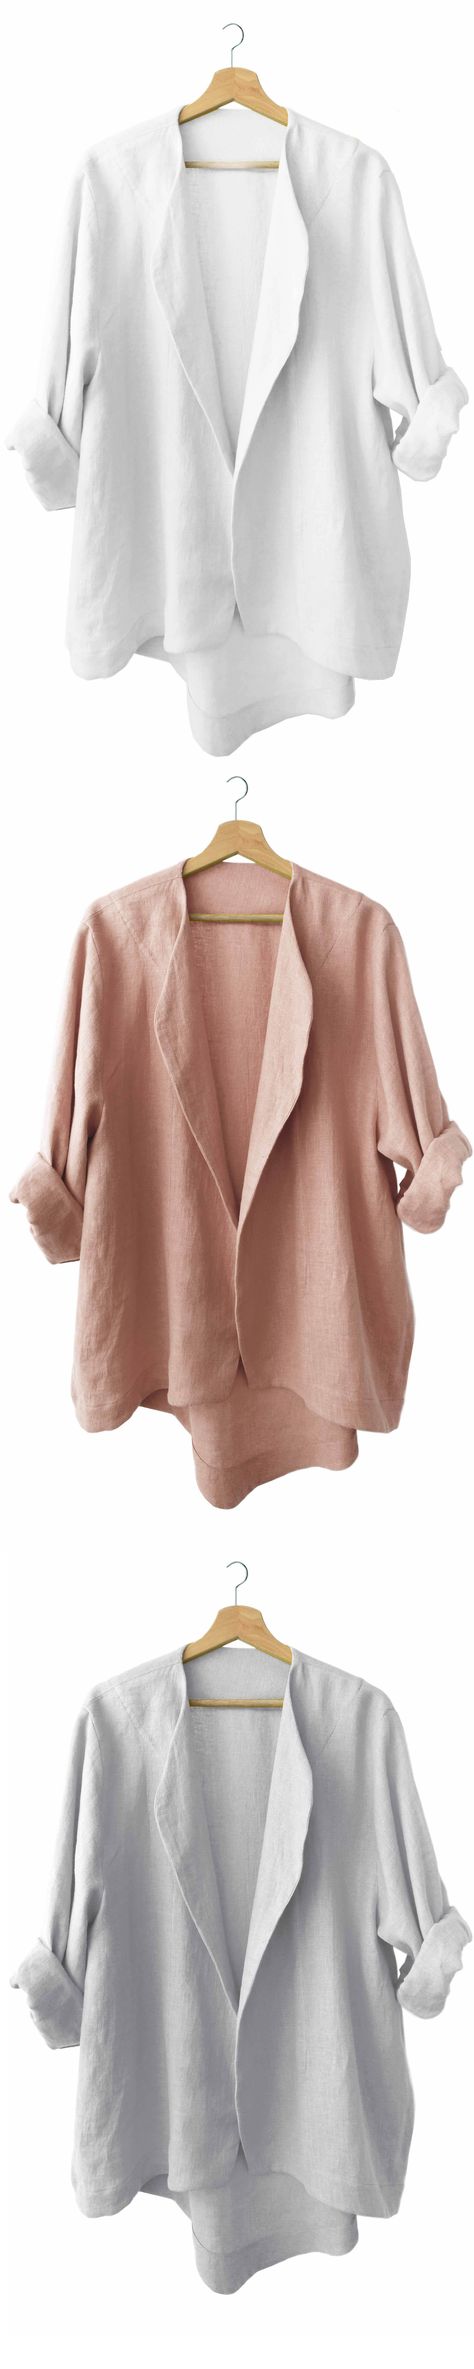 LOVELY HOME IDEA // LHI wear //  Linen jackets Linz, Kimonos, Outfits For Work Summer, Capsule Fashion, Capsule Wardrobe Ideas, Outer Linen, Fashion Outfits For Work, Summer Polyvore, Linen Jackets Women